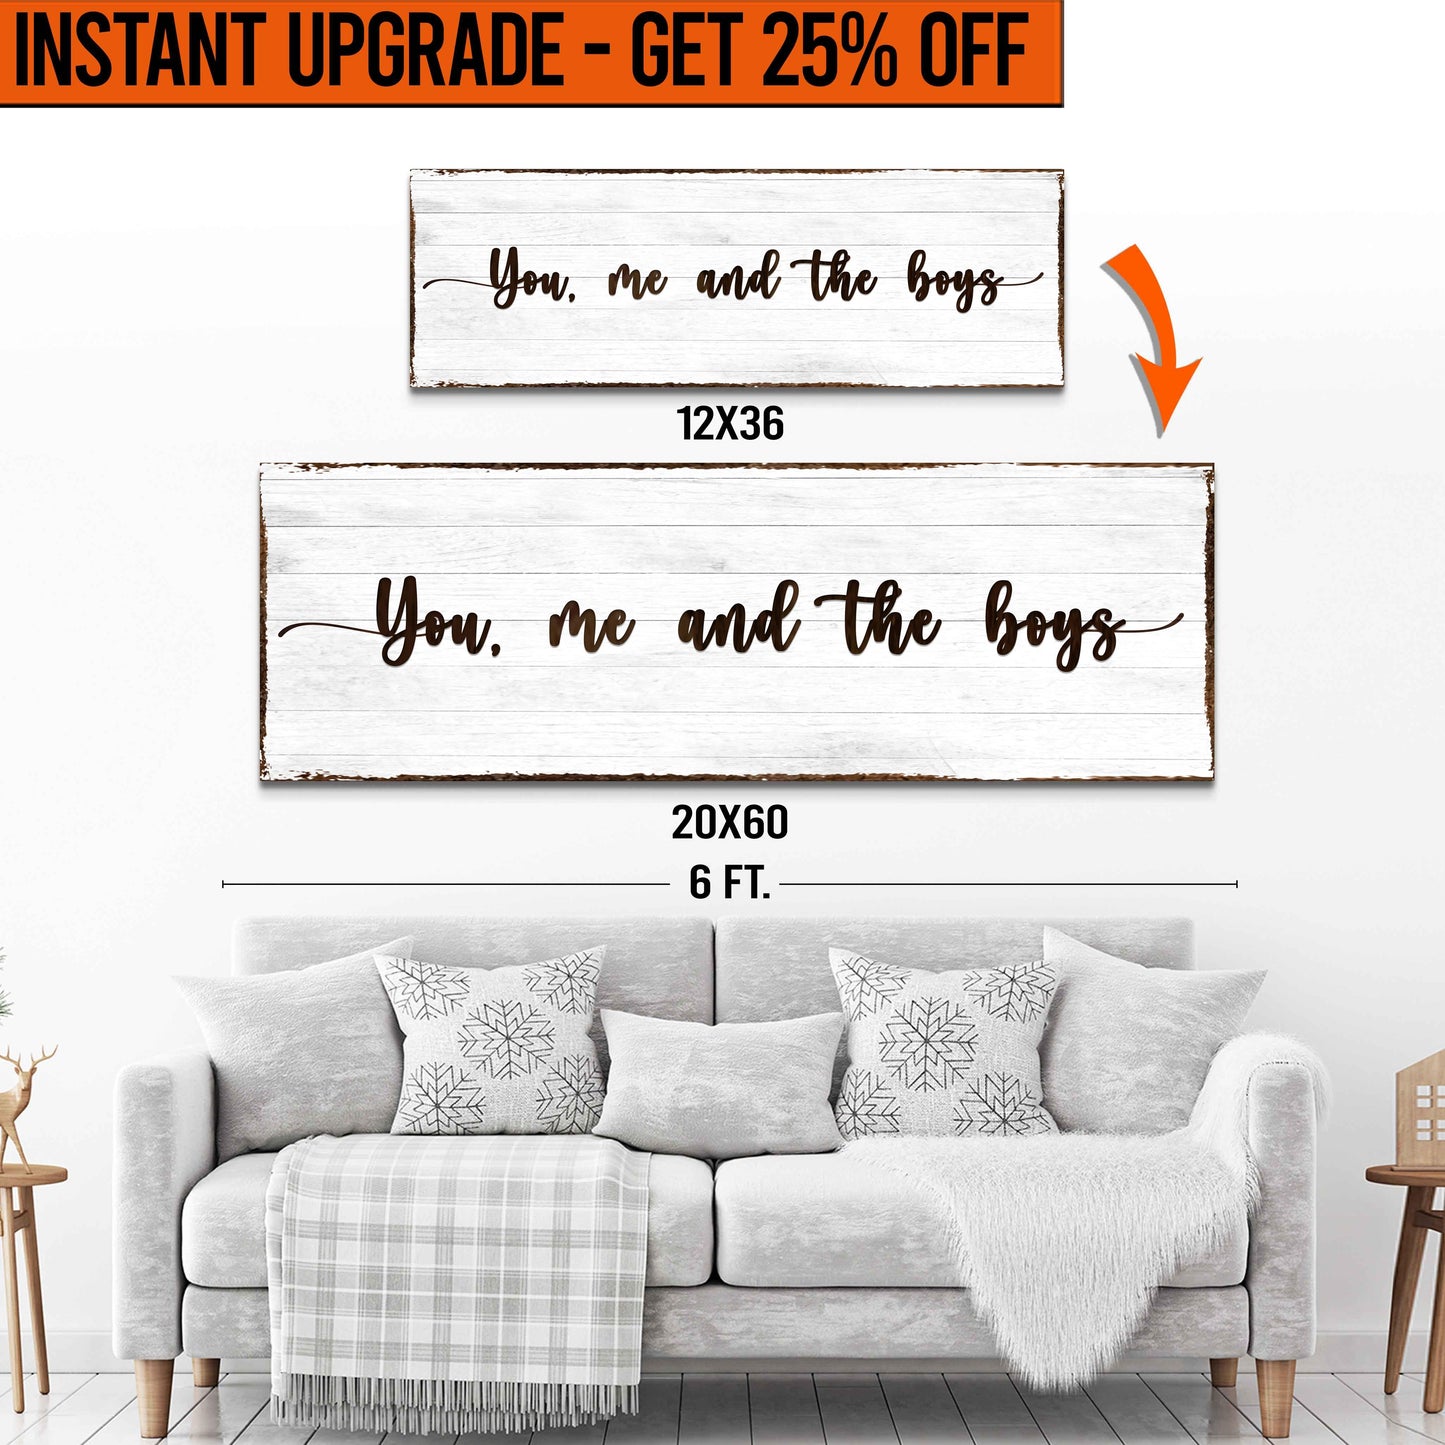 Upgrade Your 'You Me And The Boys' (Style 1) Canvas To 20x60 Inches